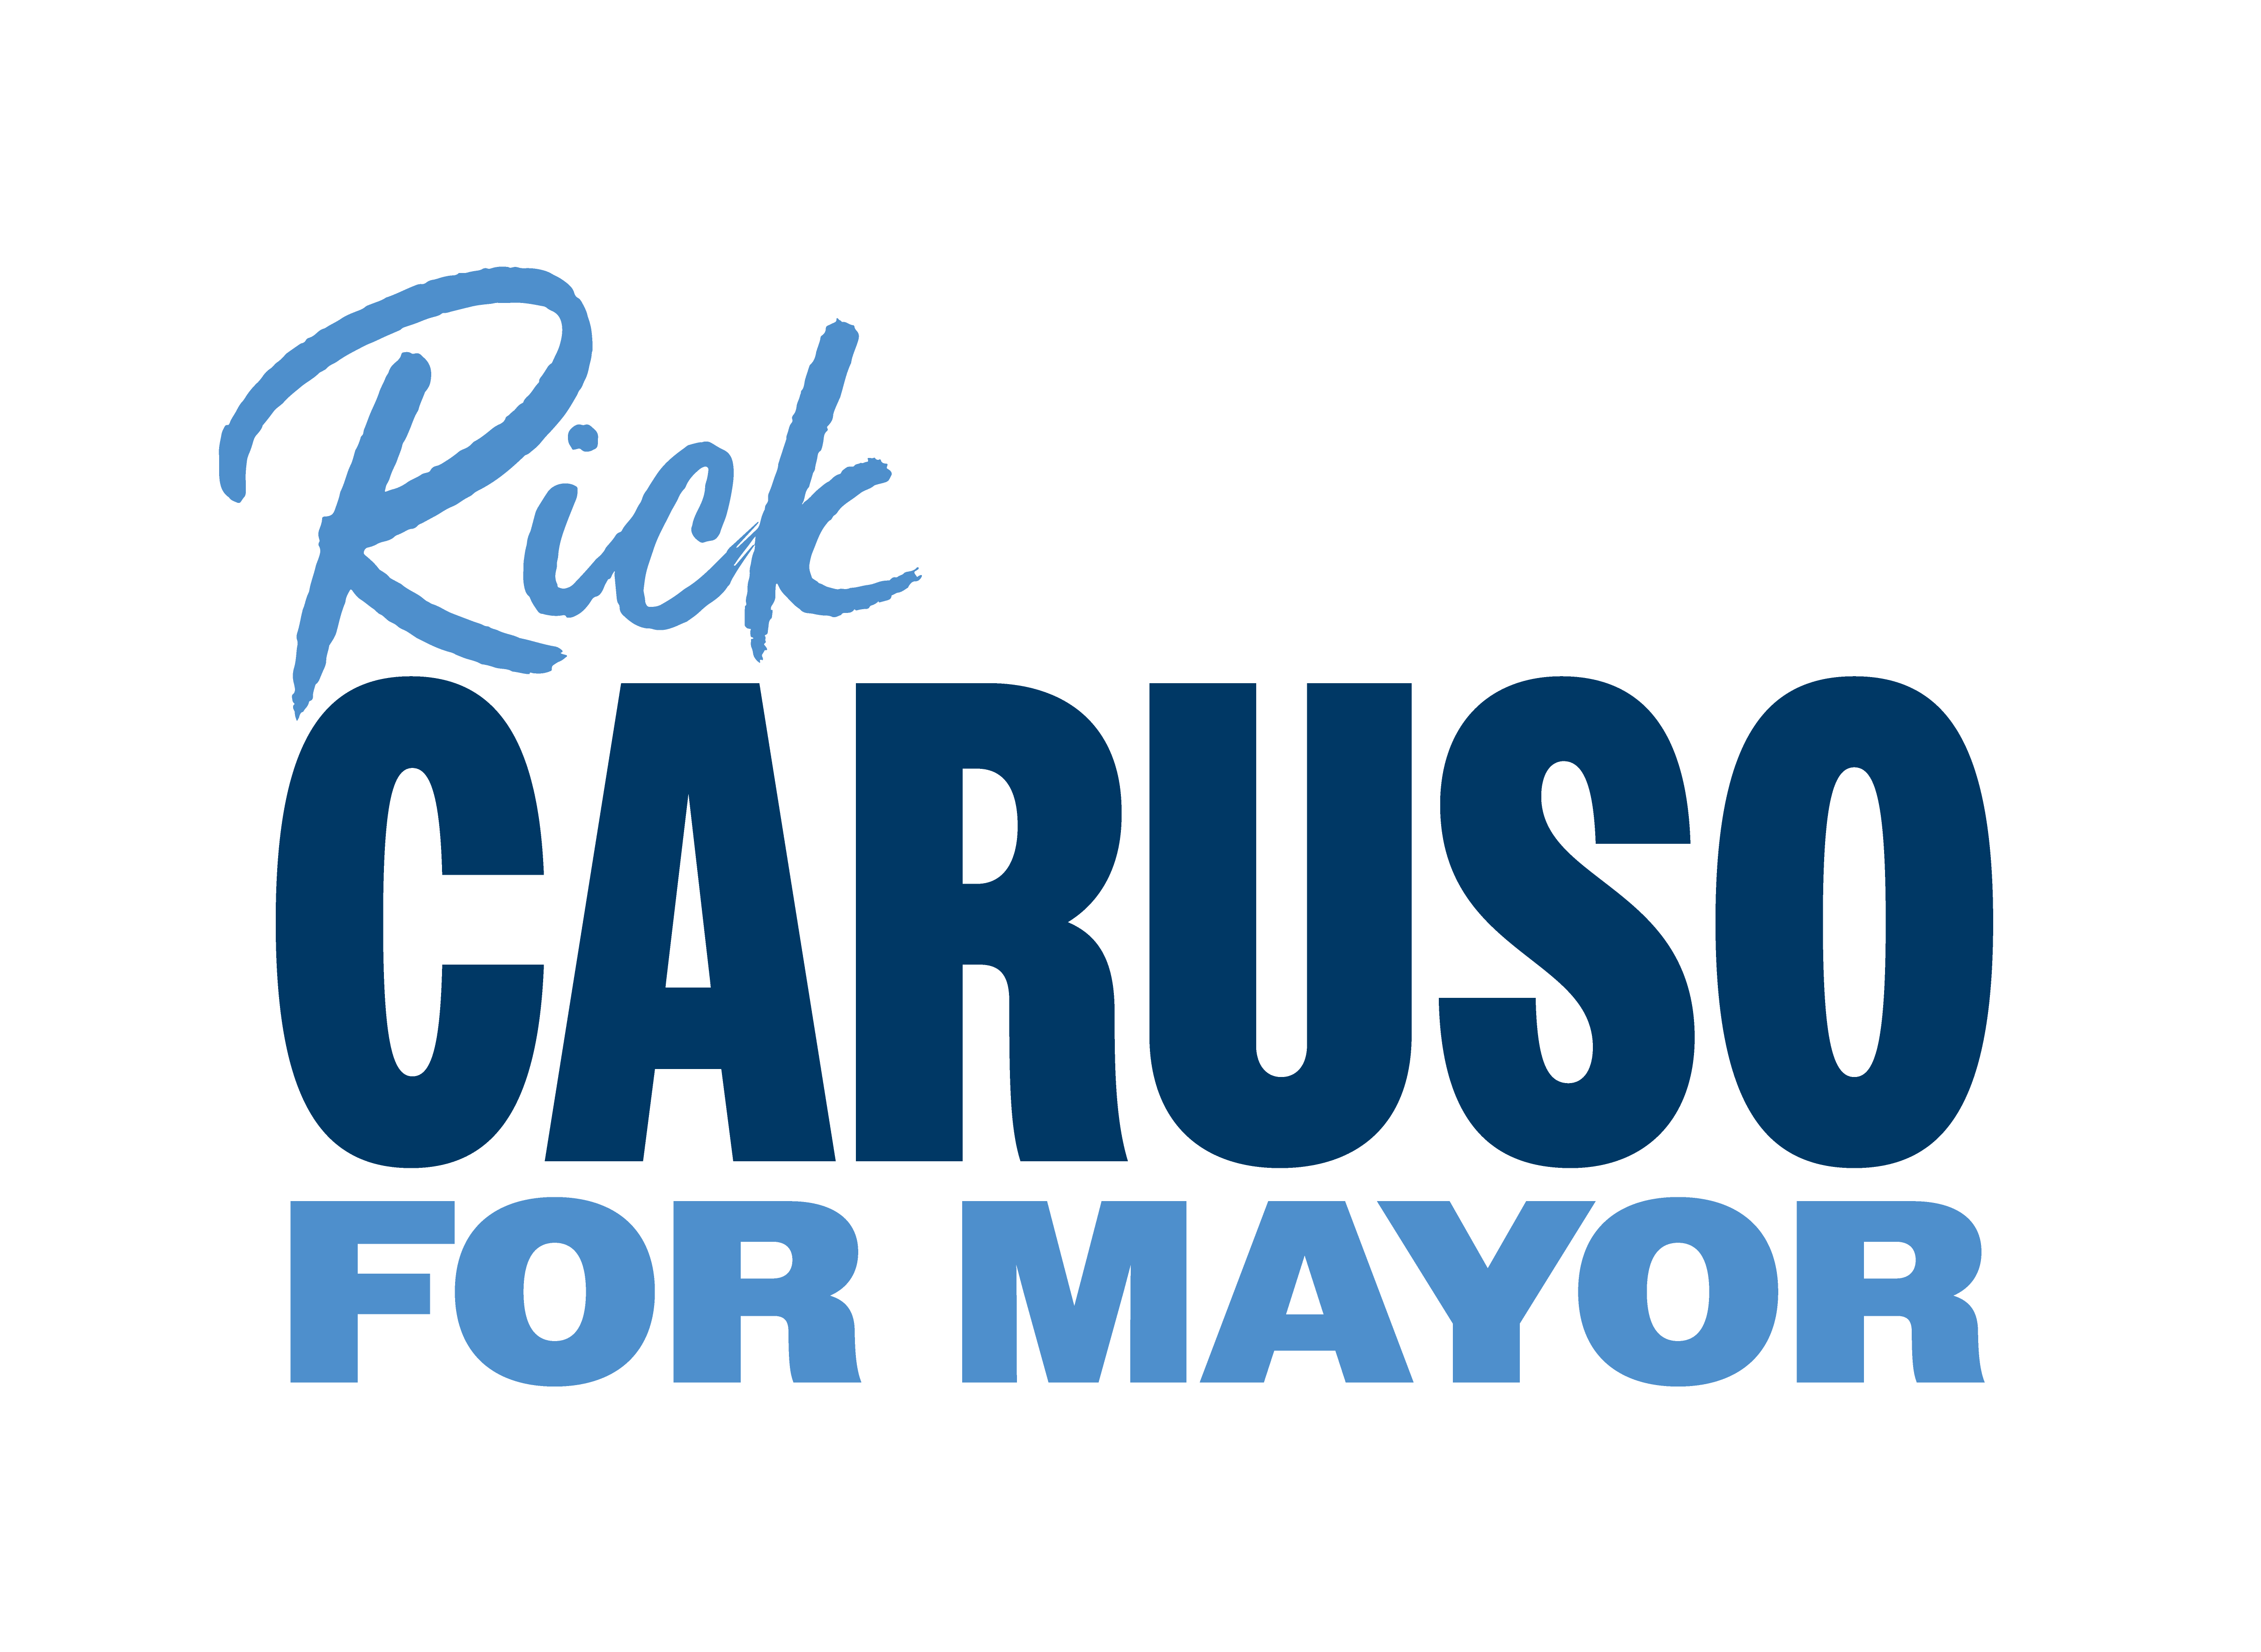 Rick Caruso for Mayor 2022 General